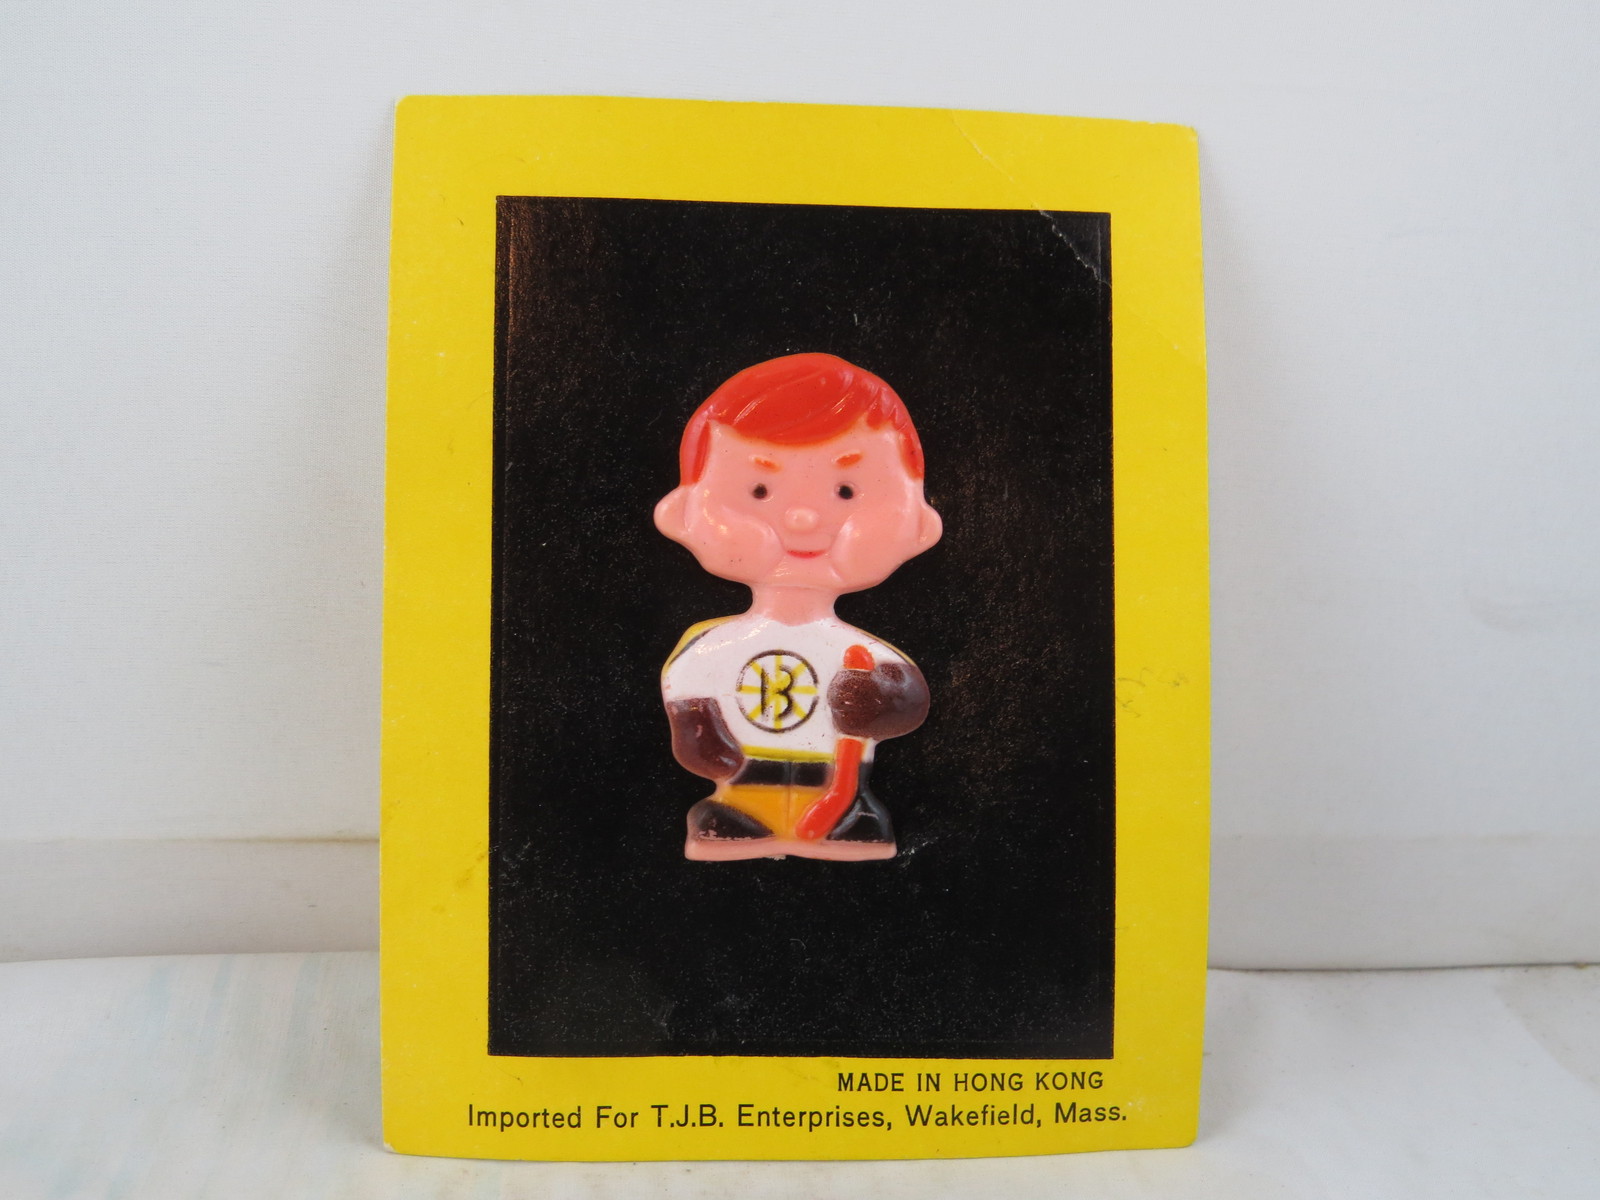 Primary image for Boston Bruins Pin (VTG) - Boy in Home in Uniform  Celluloid Pin - New on Card